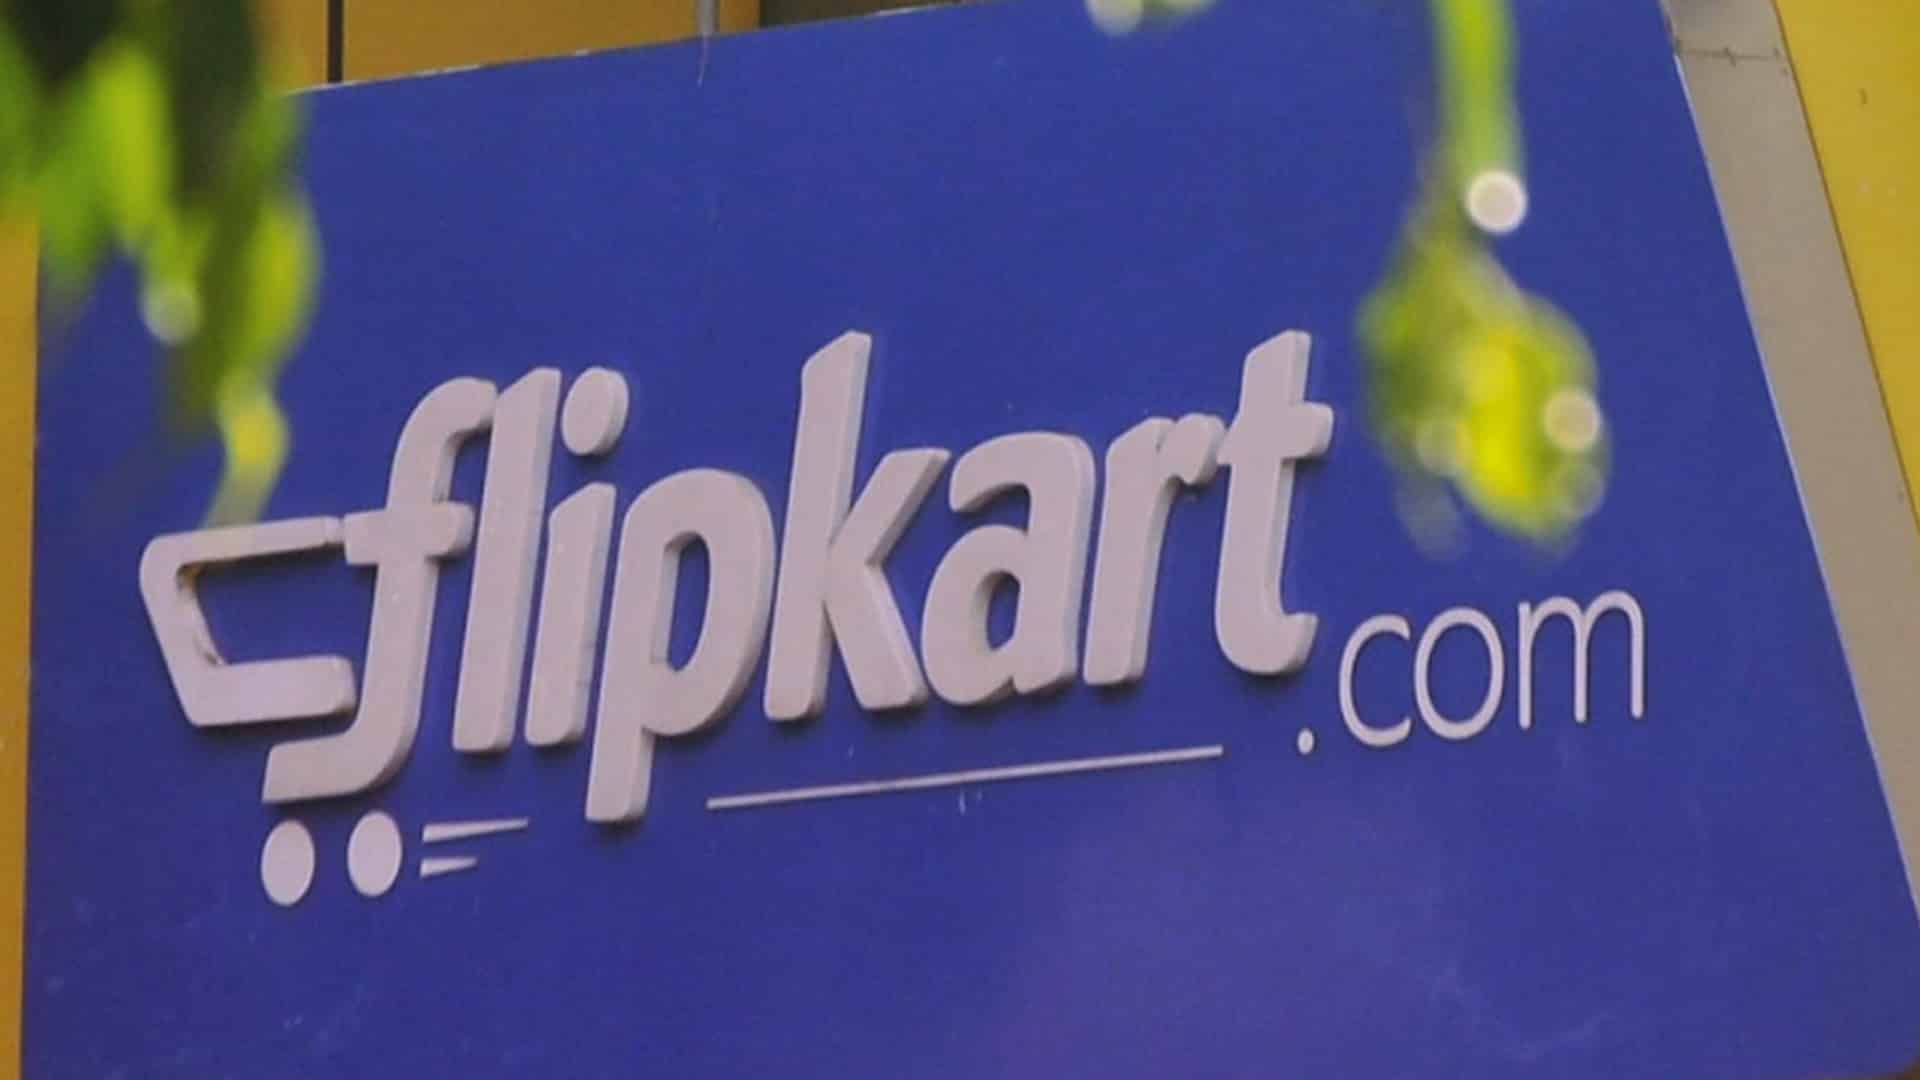 Flipkart forays into home product service business